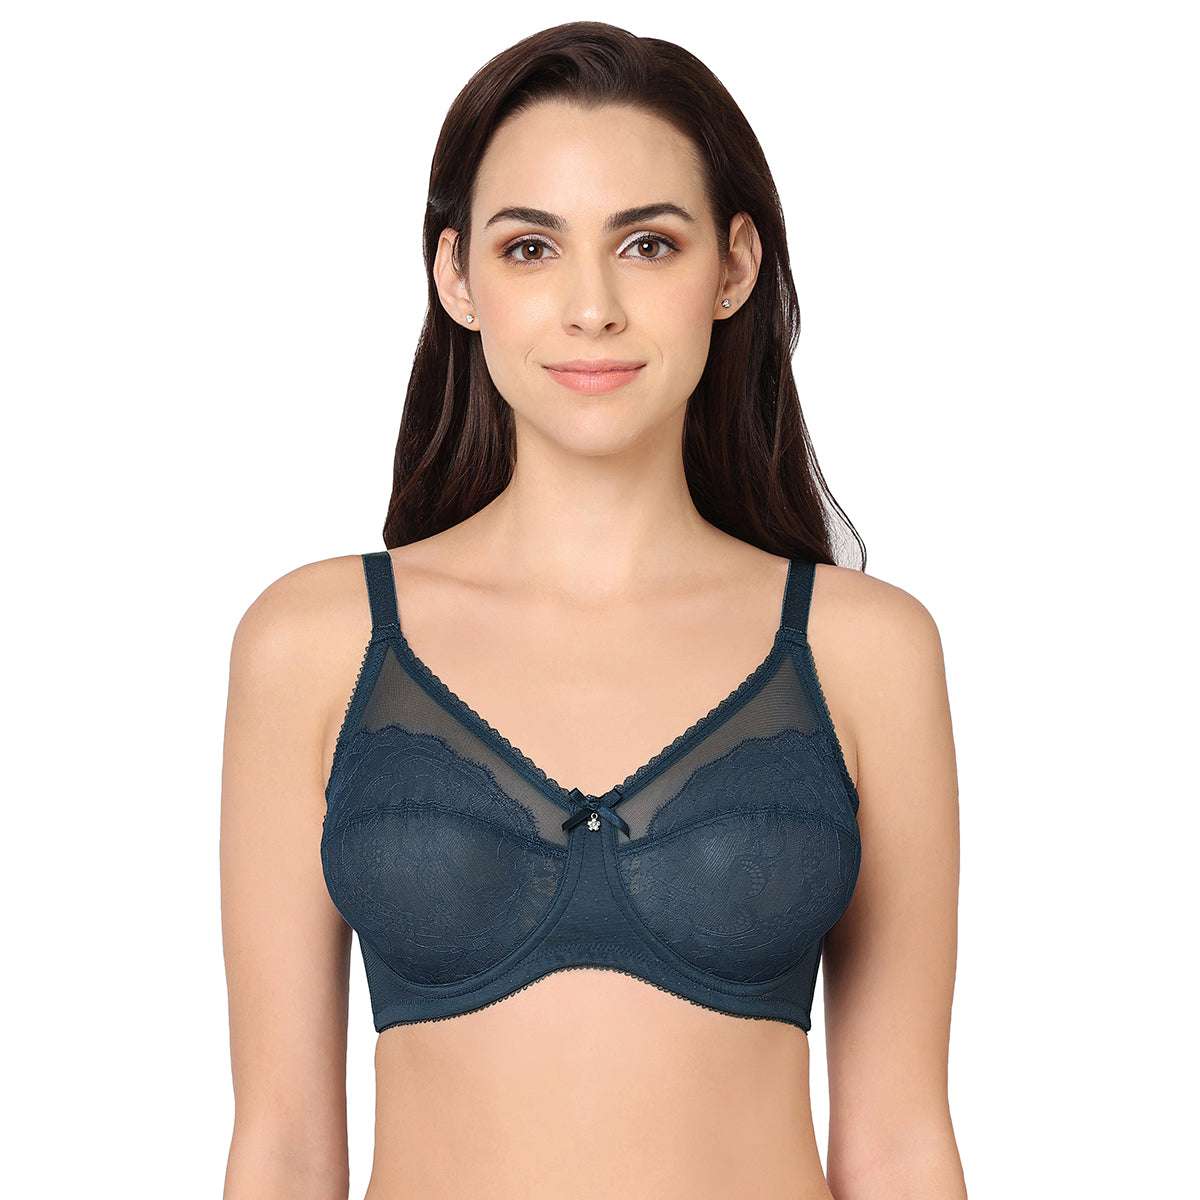 Retro Chic Non-Padded Wired Full Coverage Full Cup Bra - Blue